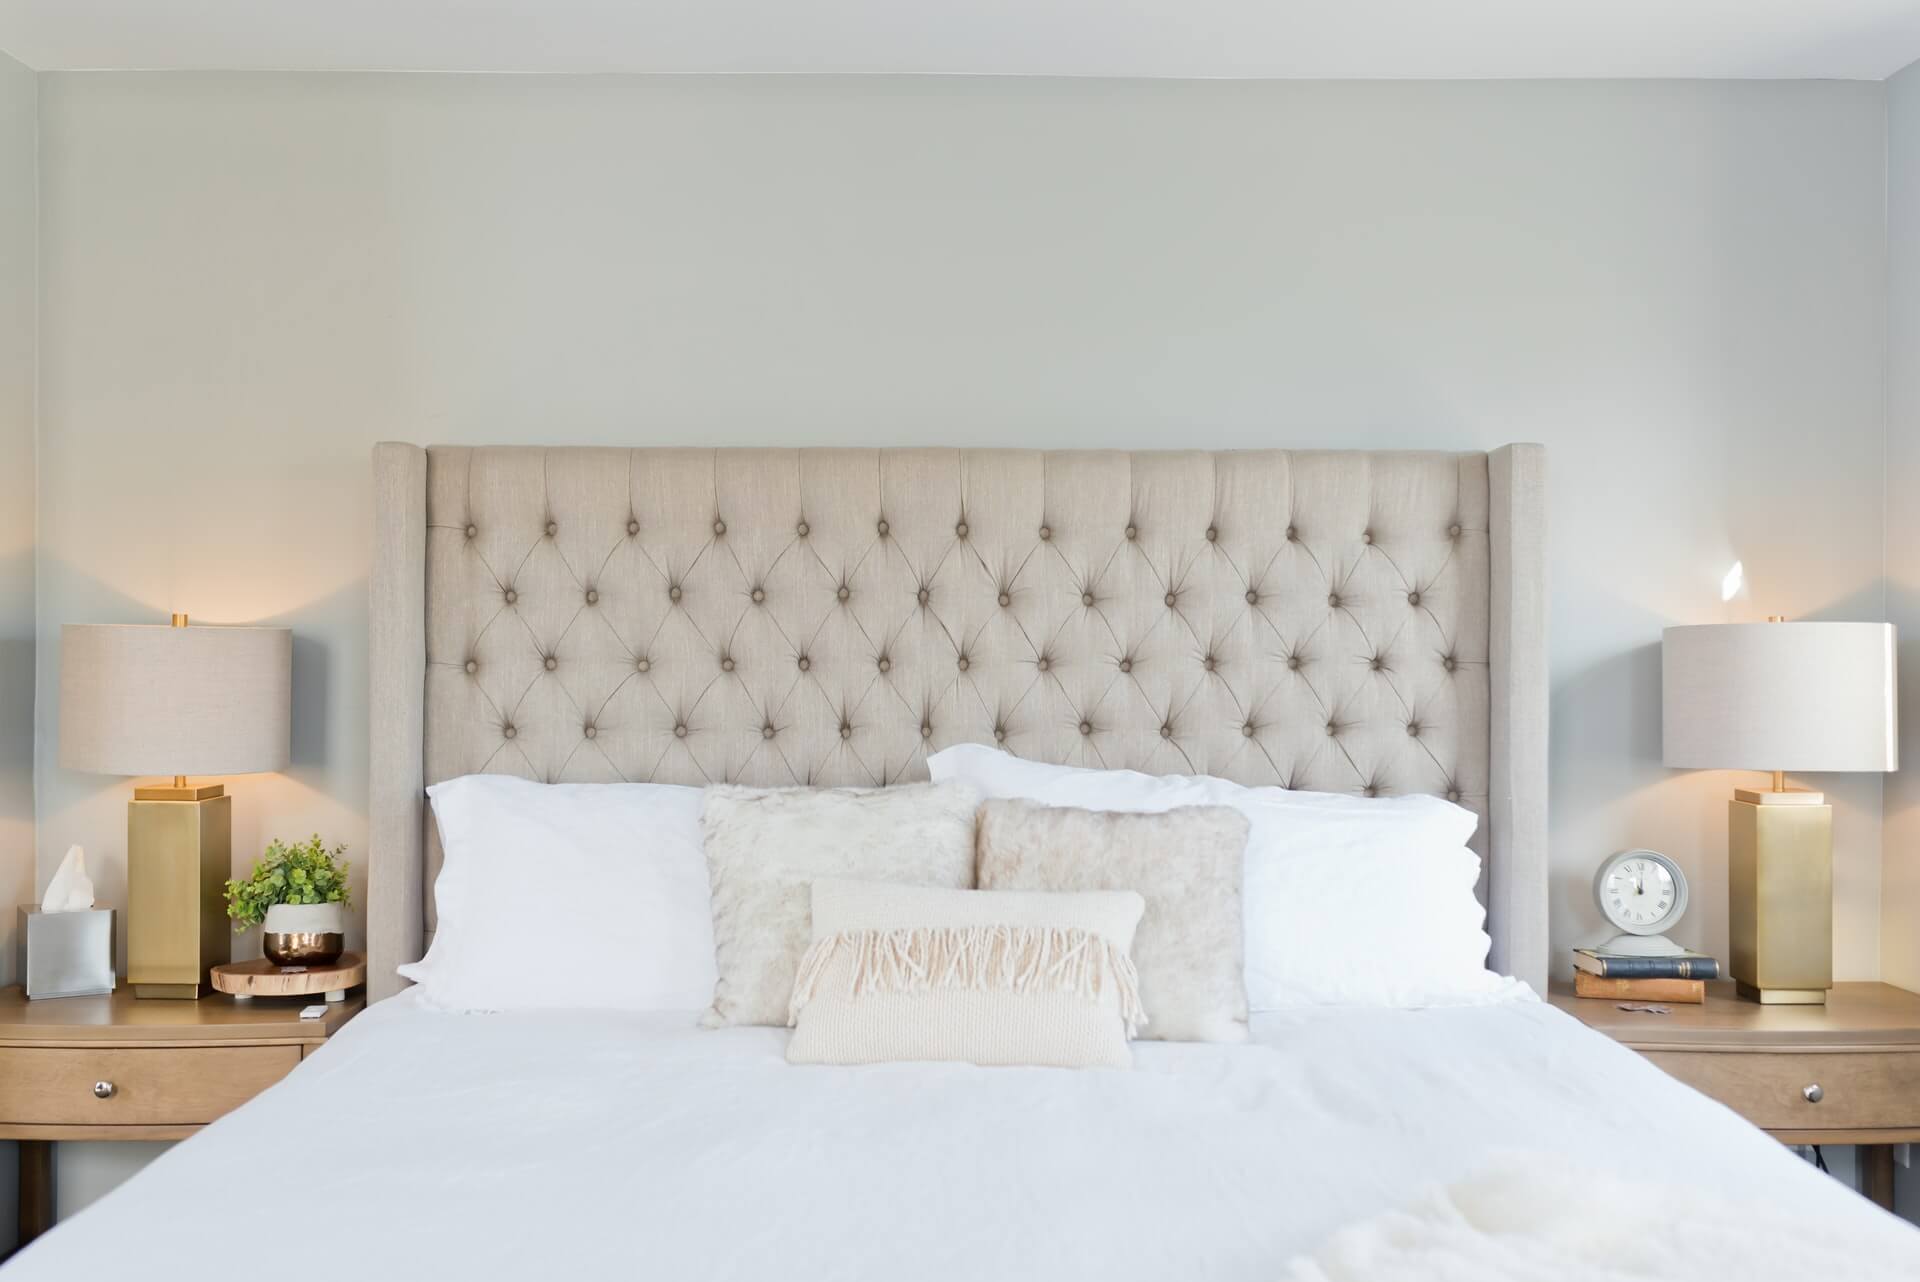 The perfect headboard for your bed